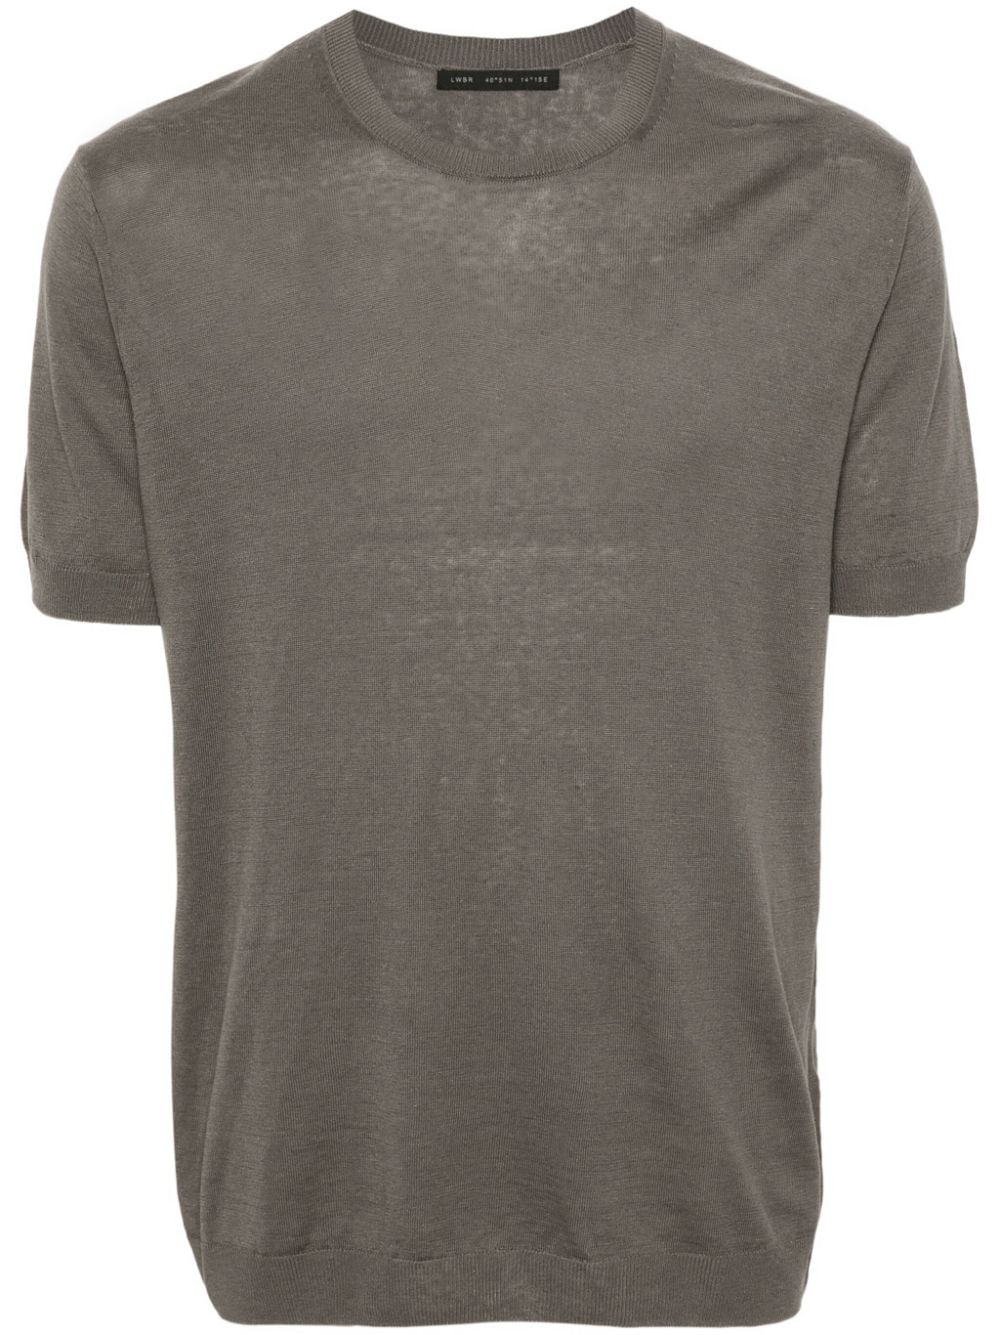 Low Brand short-sleeve knitted T-shirt - Grigio